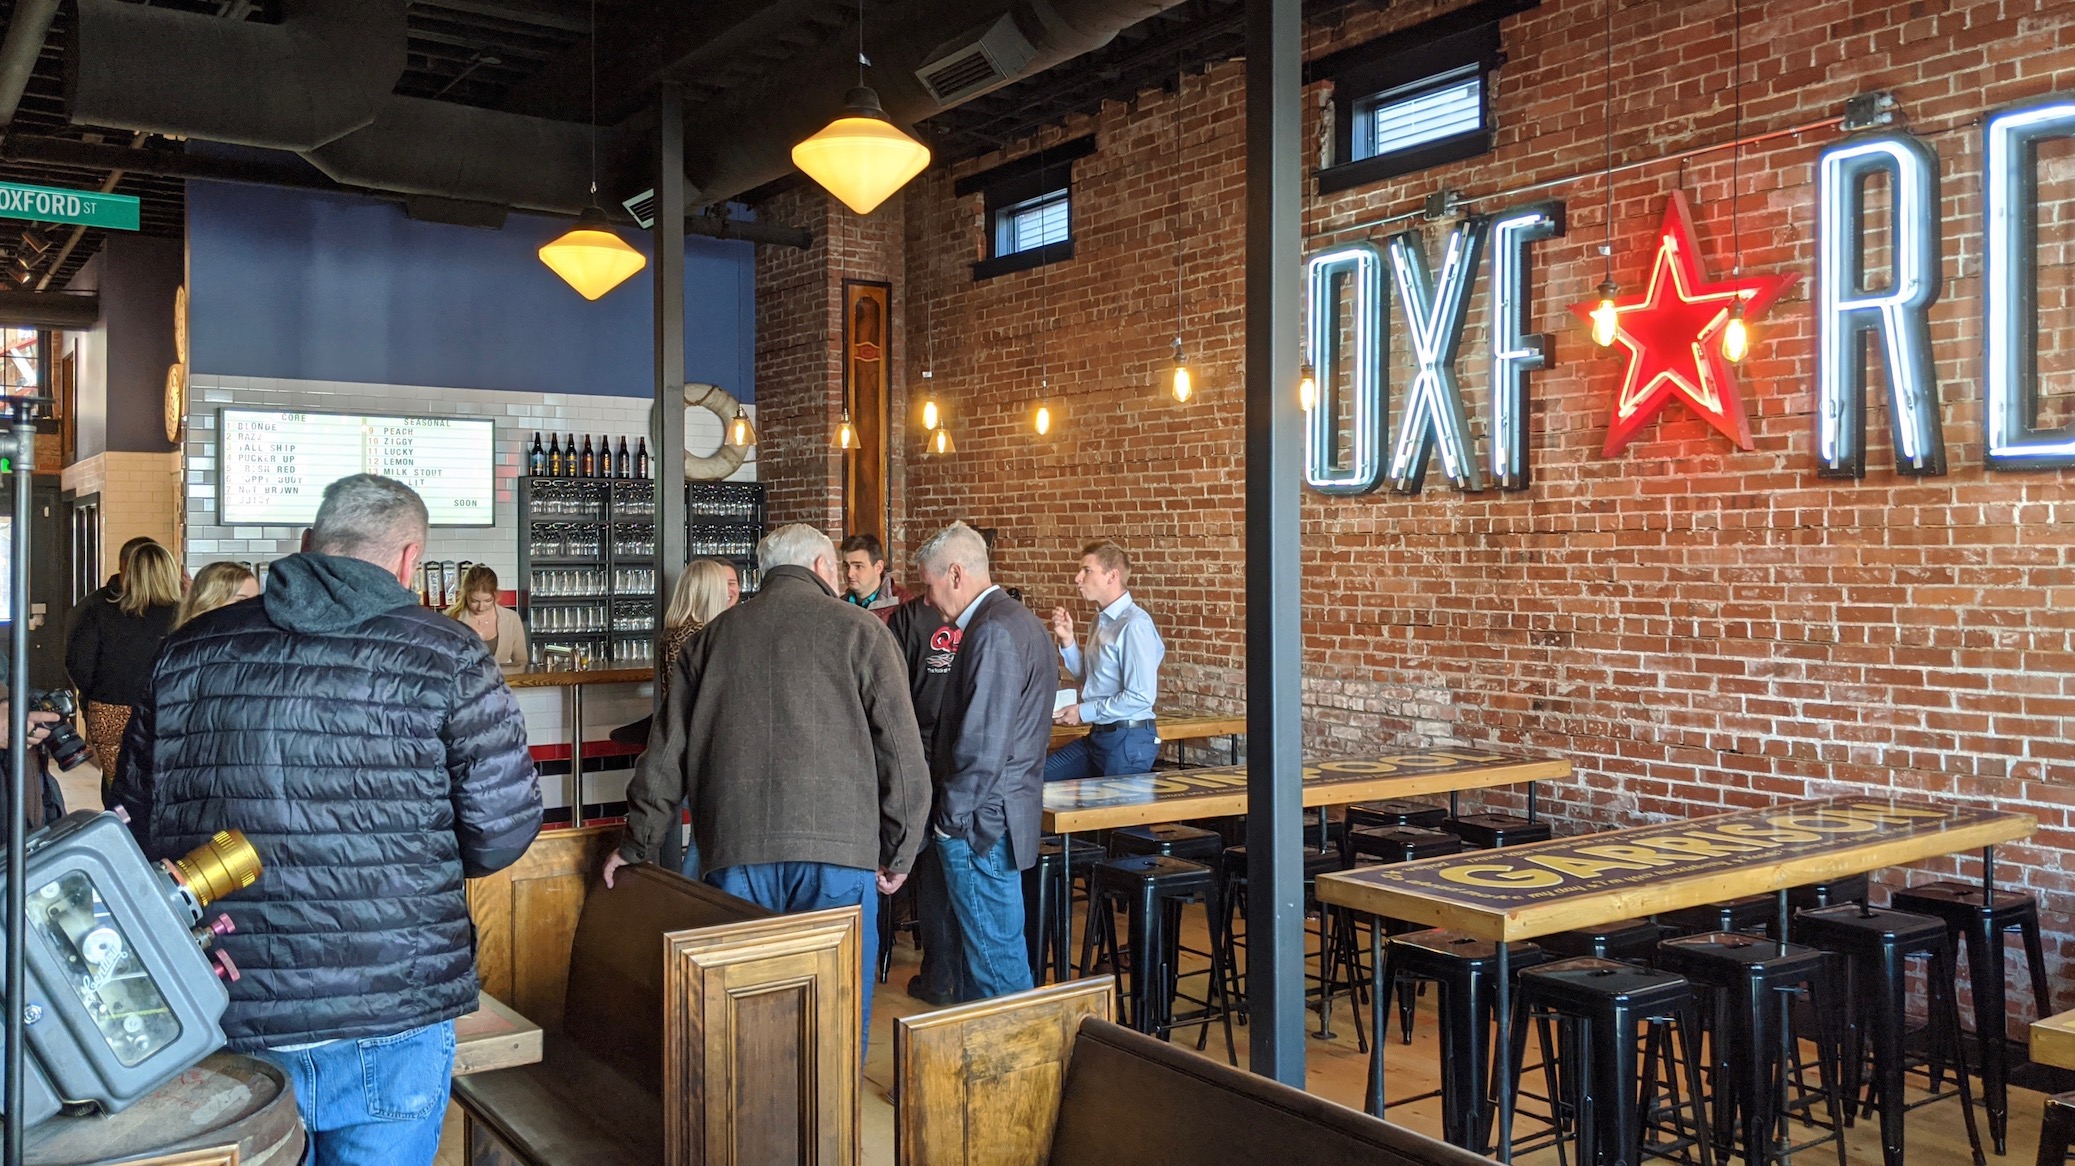 Garrison's new taproom features decor inspired by the Oxford Theatre and cinema.